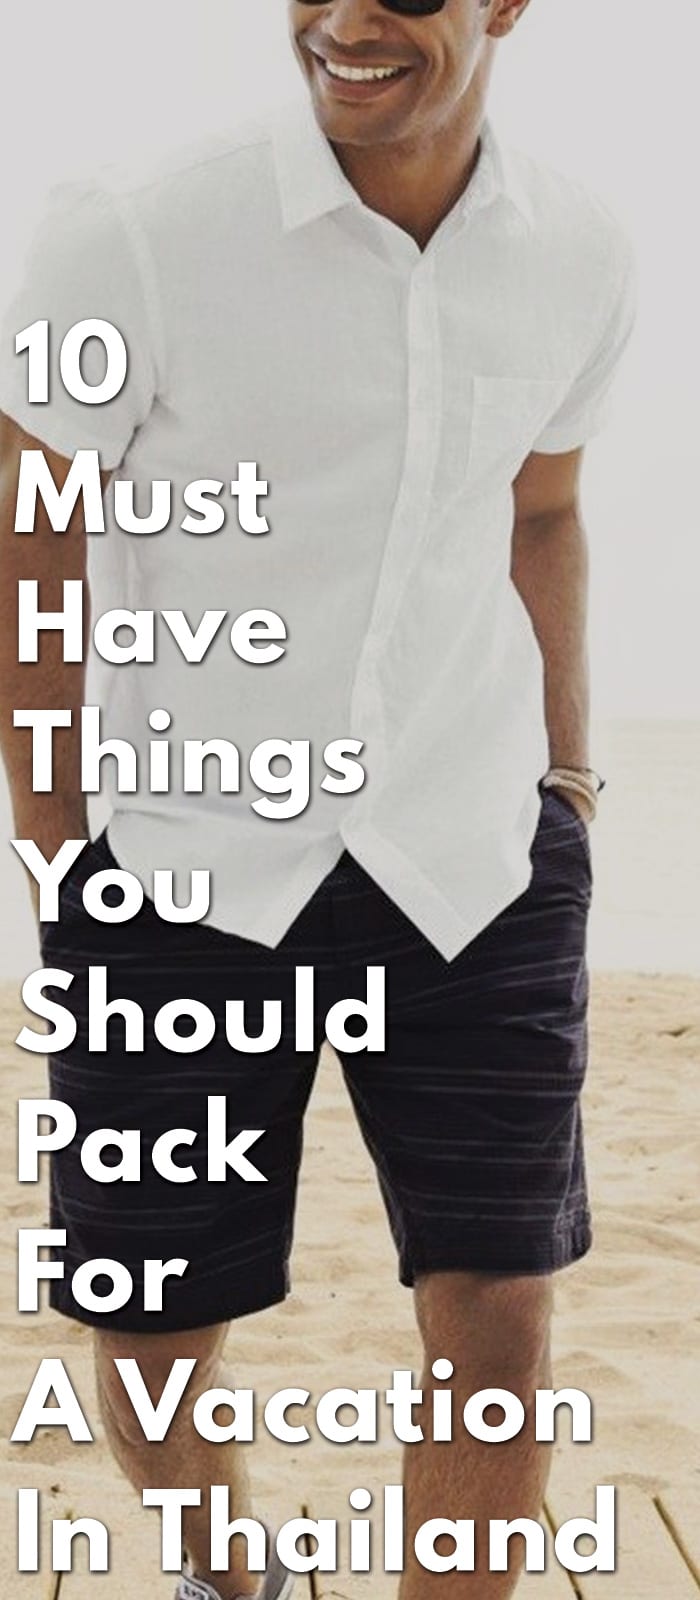 10-Must-Have-Things-You-Should-Pack-For-A-Vacation-In-Thailand